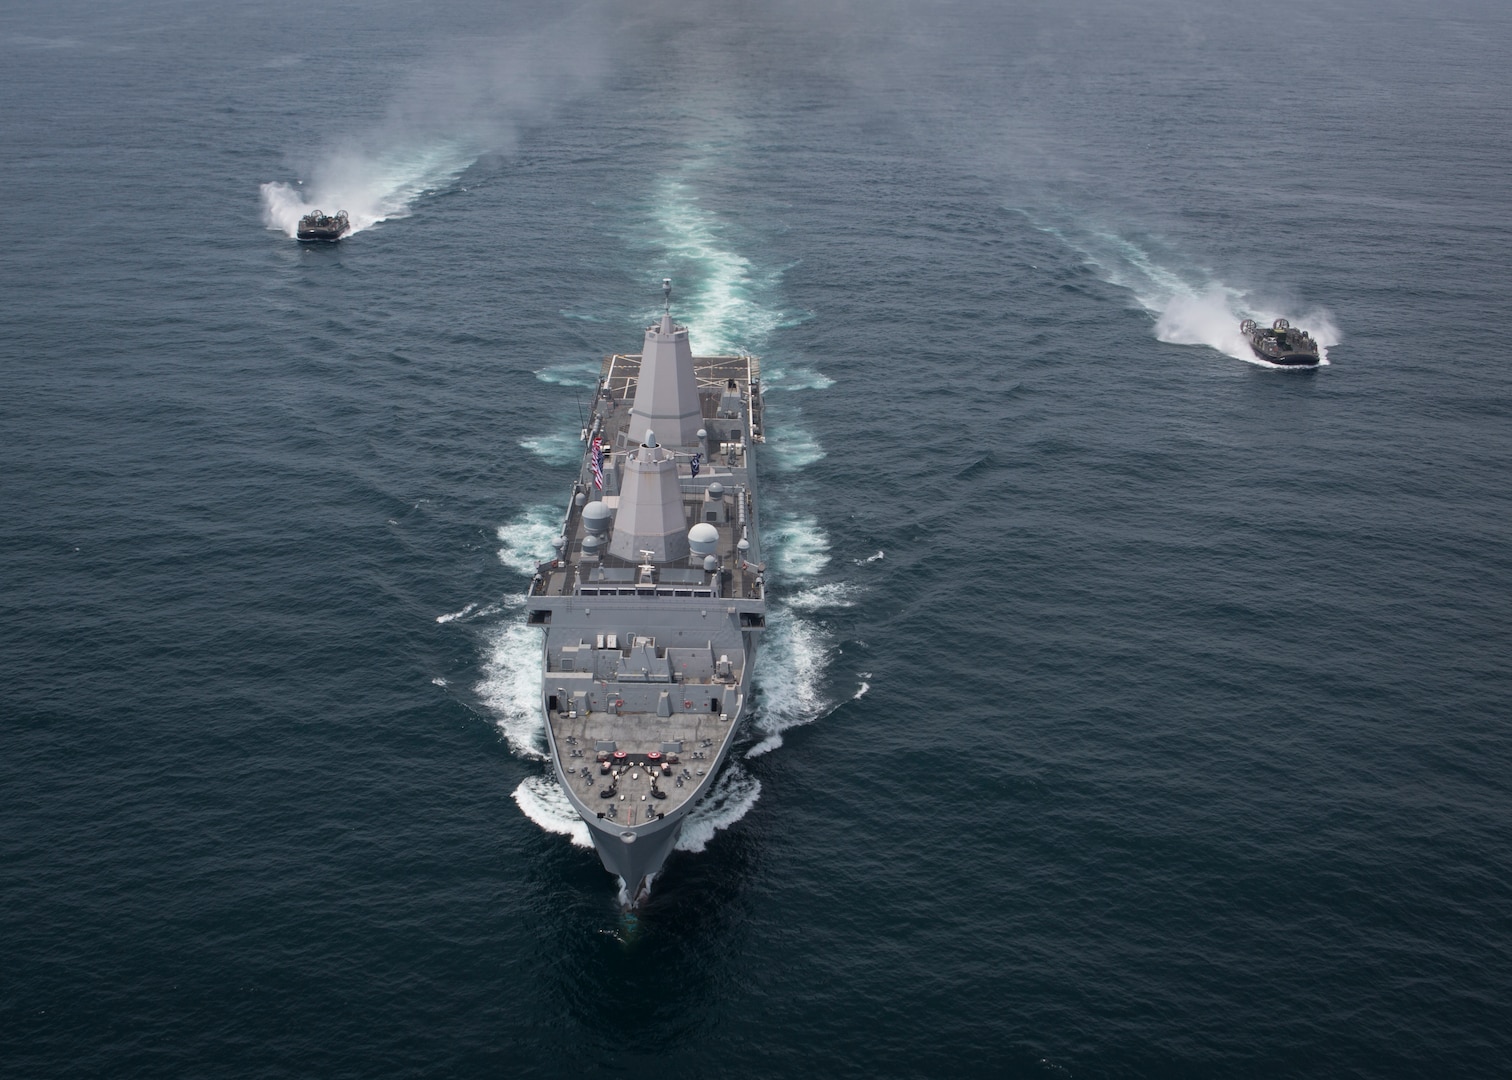 The U.S. Navy San Antonio-class amphibious transport dock ship USS Somerset (LPD 25)  and two Landing Craft, Air Cushioned hovercraft transport U.S. Marines and sailors with Special Purpose Marine Air-Ground Task Force - Peru during a humanitarian assistance and disaster relief exercise off of the coast of Chorrillos Beach near Lima, Peru, Nov. 24, 2018.